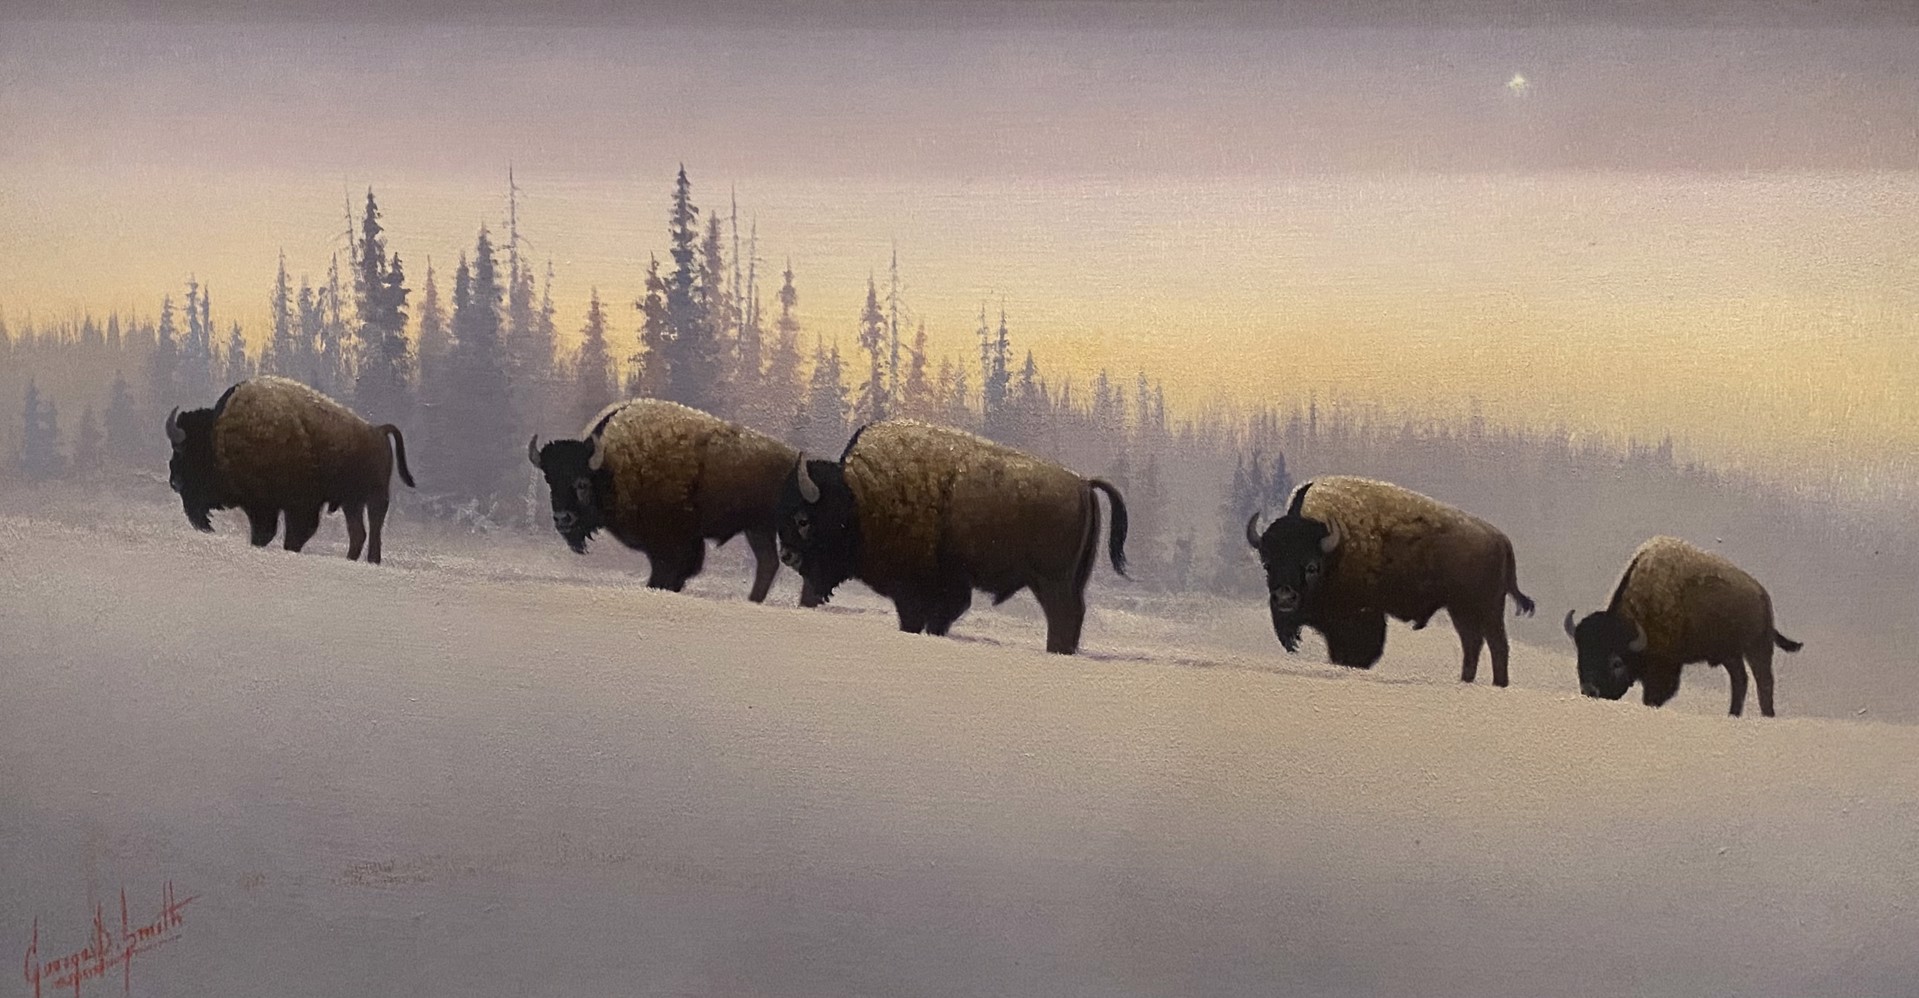 CHRISTMAS EVE IN YELLOWSTONE by George "Dee" Smith